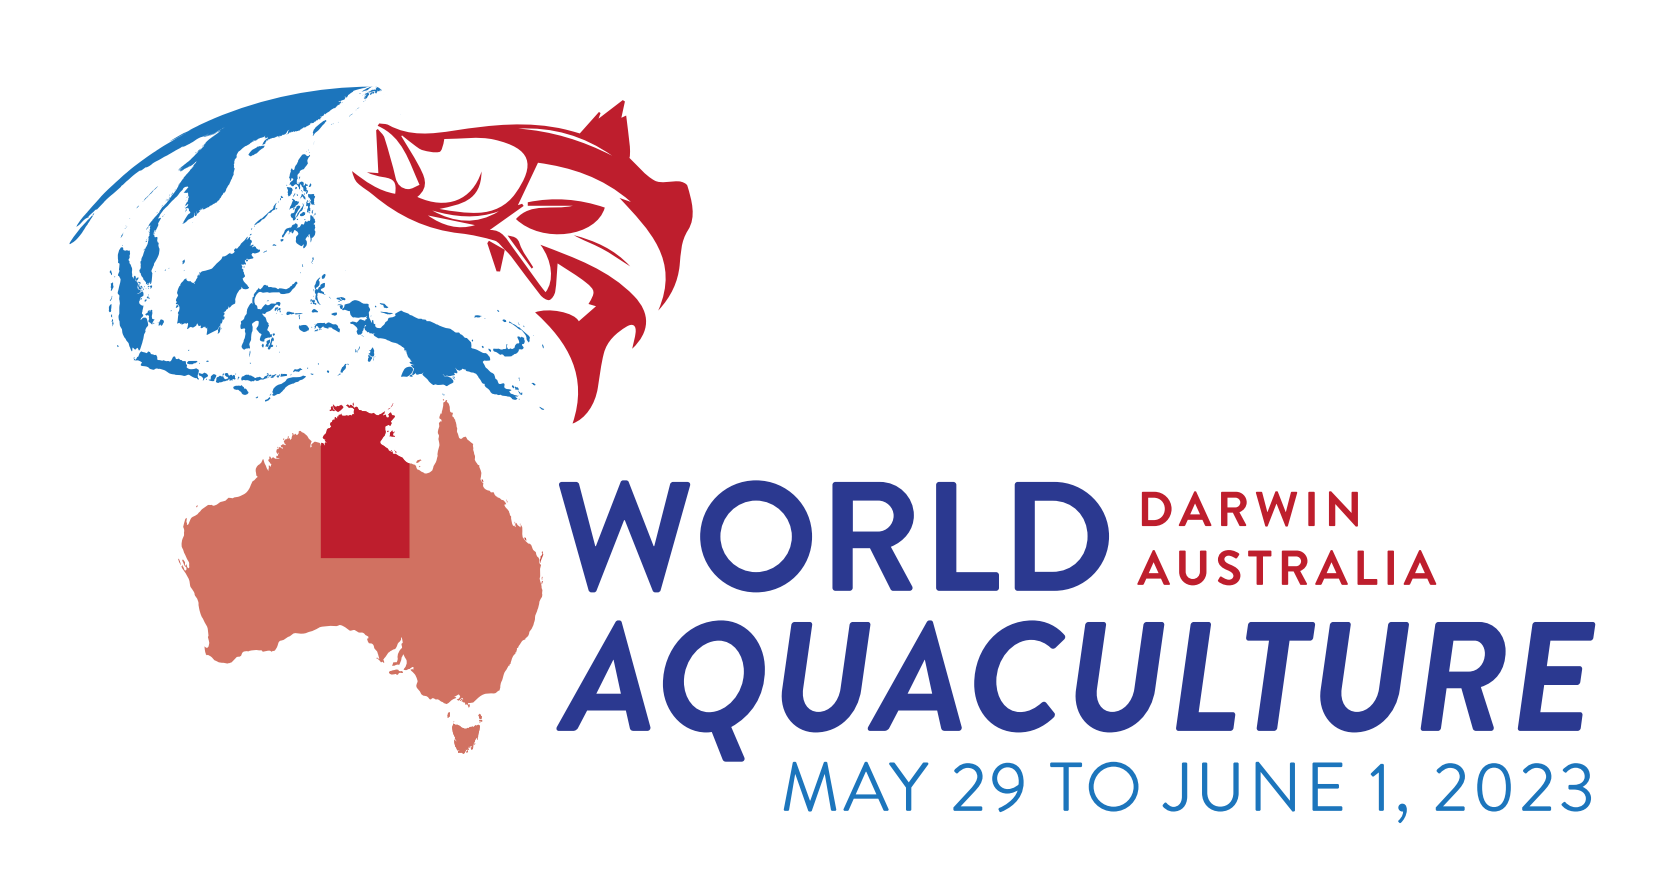 World Aquaculture Conference 2023 coming to Darwin